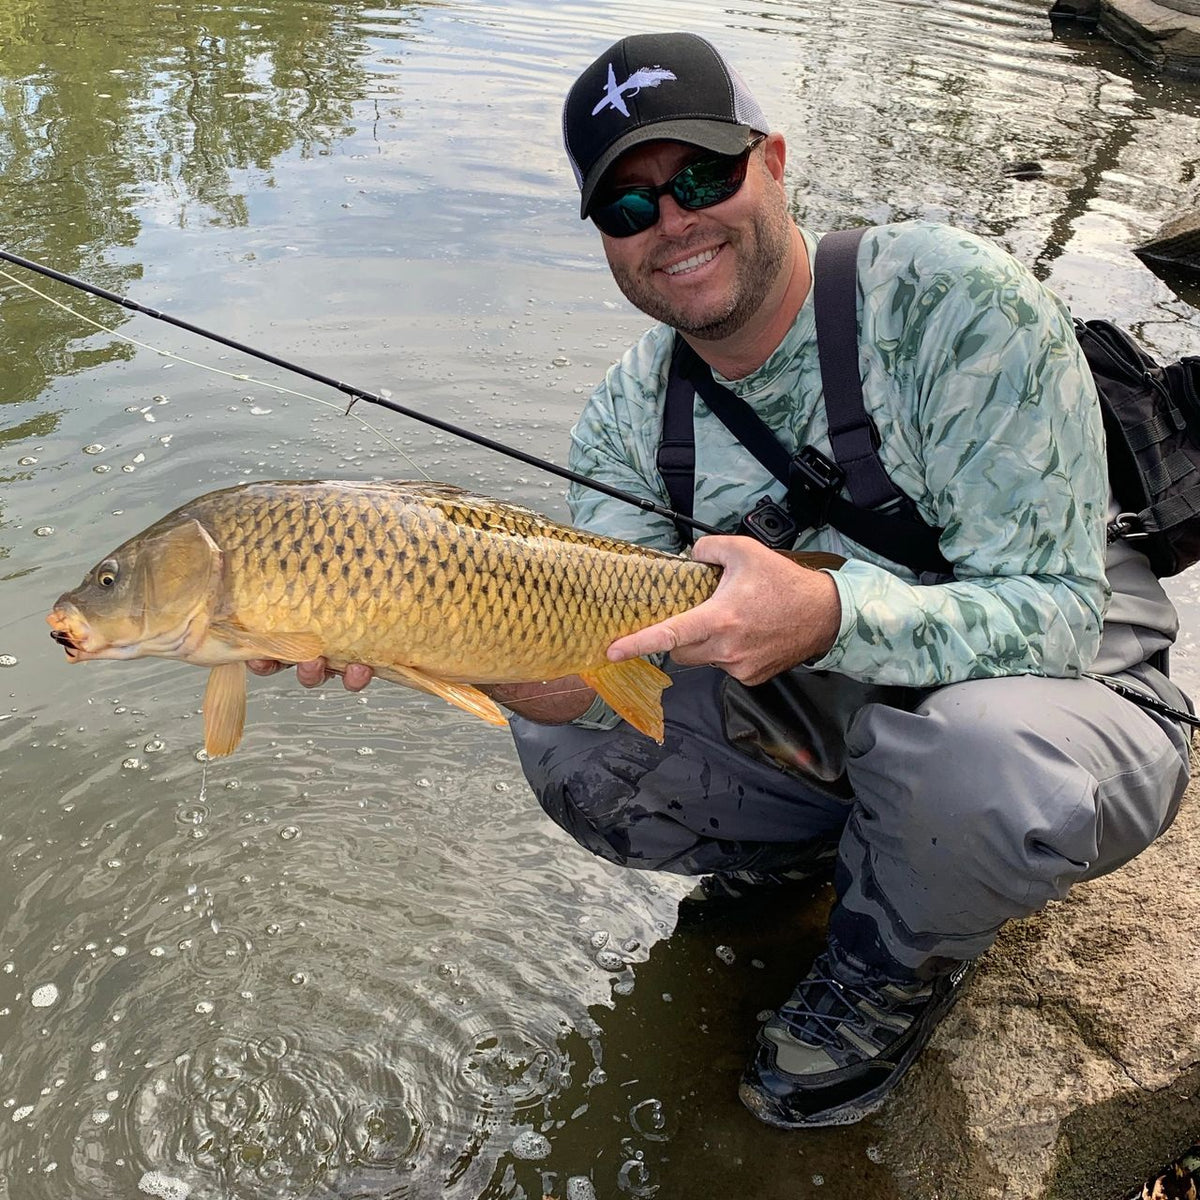 Personal Best Carp on the Fly in October